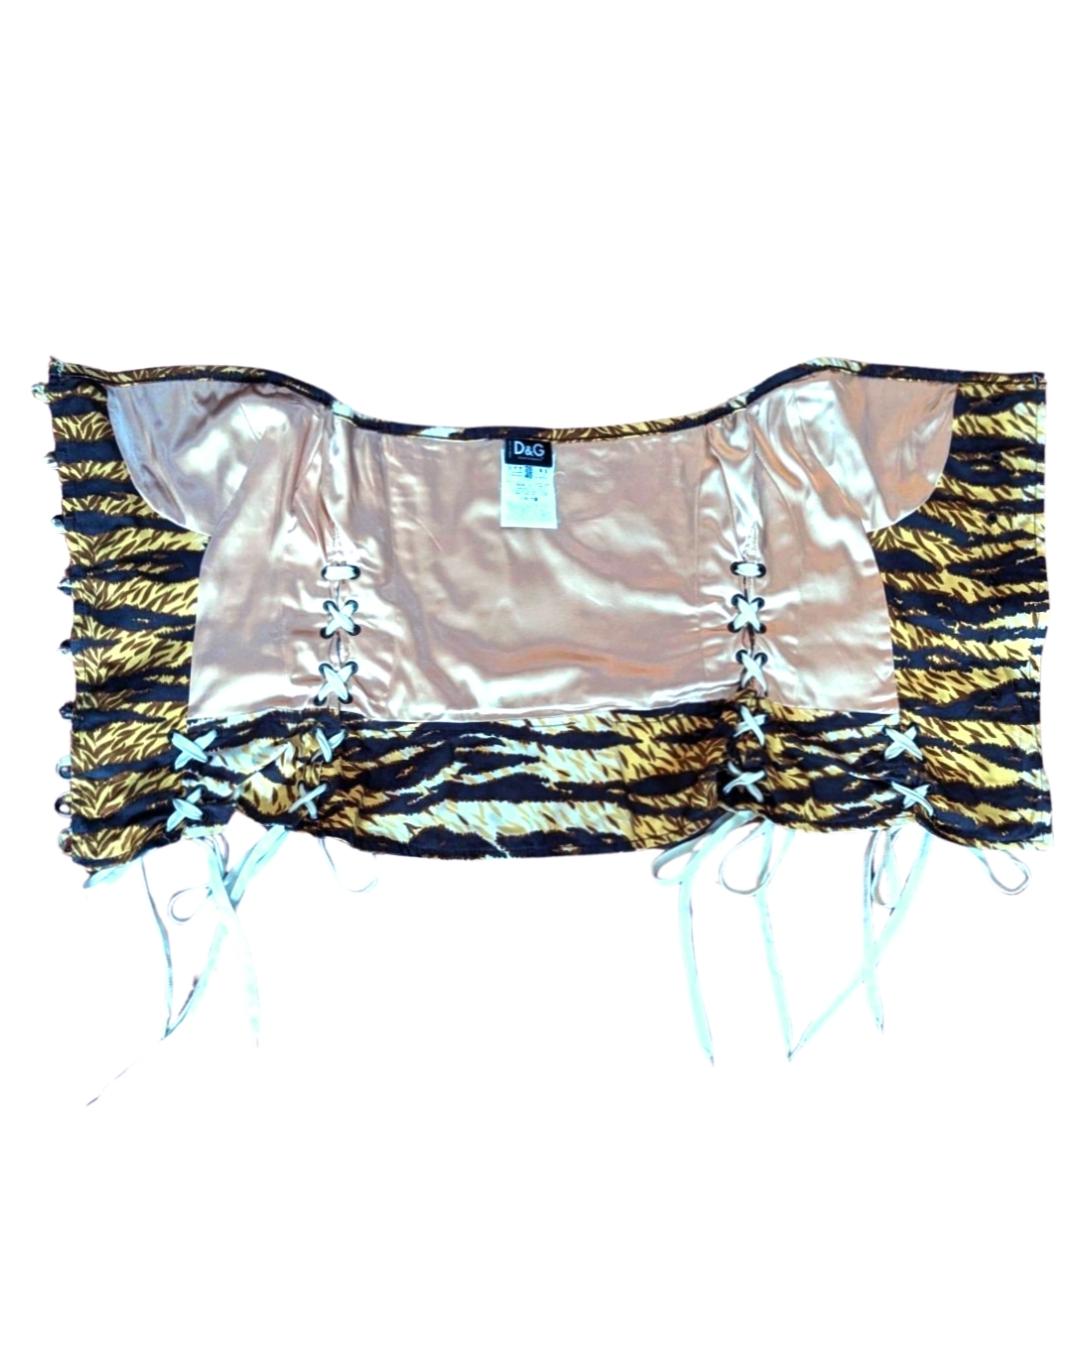 D&G by Dolce & Gabbana Animal Print Bustier For Sale 8